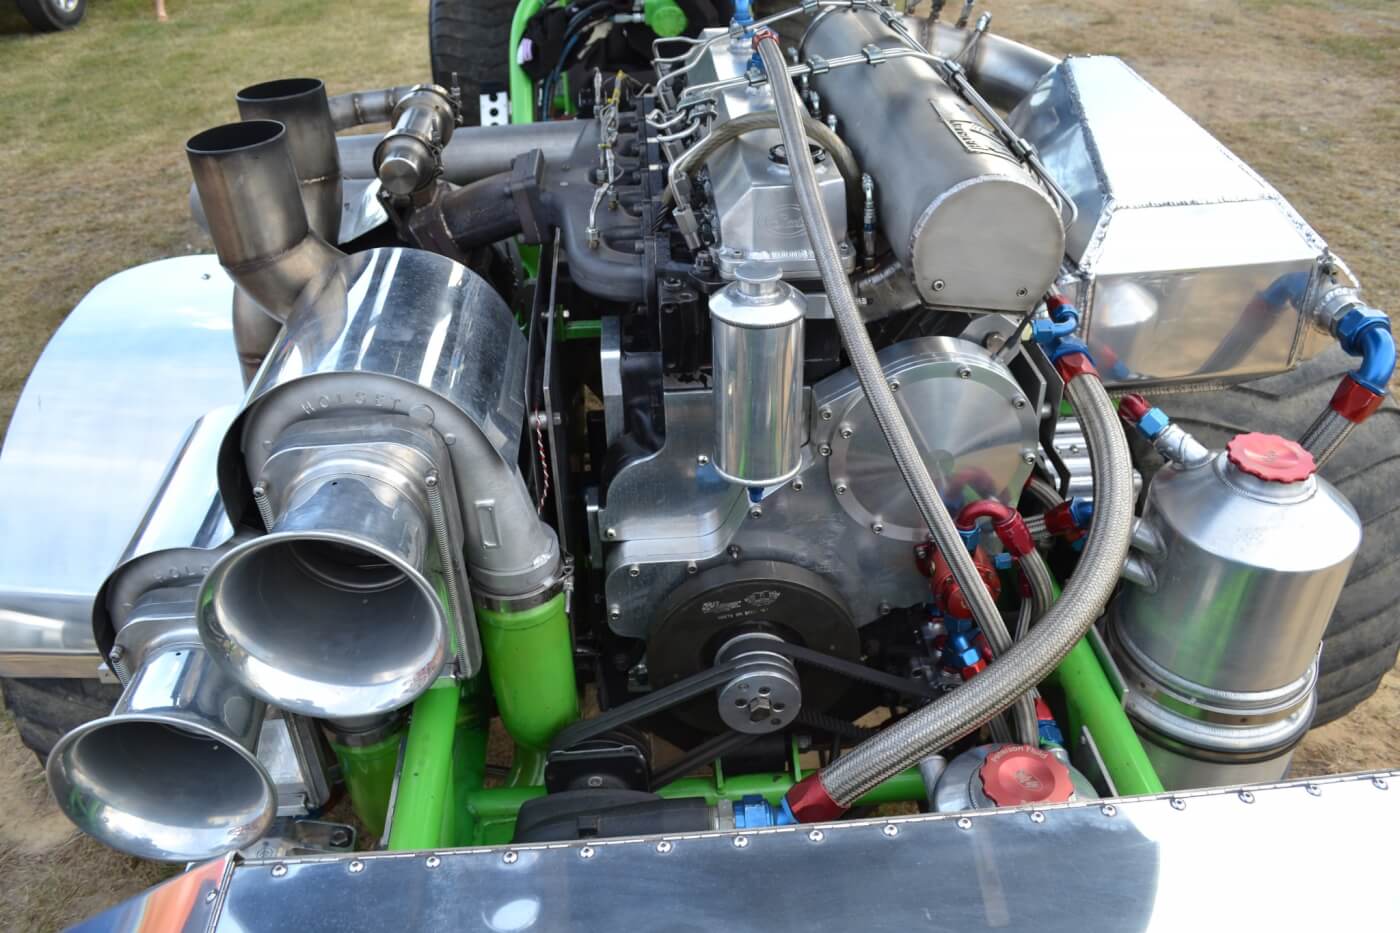 The 6.4L Cummins-based powerplant in Matt Clemon's Alter Ego puller is a sight to behold. Cranking out more than 2,700 horsepower (and 3,000 lb-ft of torque) the mechanical monster can spin 6,000 rpm all year without needing a refresh. If you're looking for the pinnacle of pickup performance, this is it.